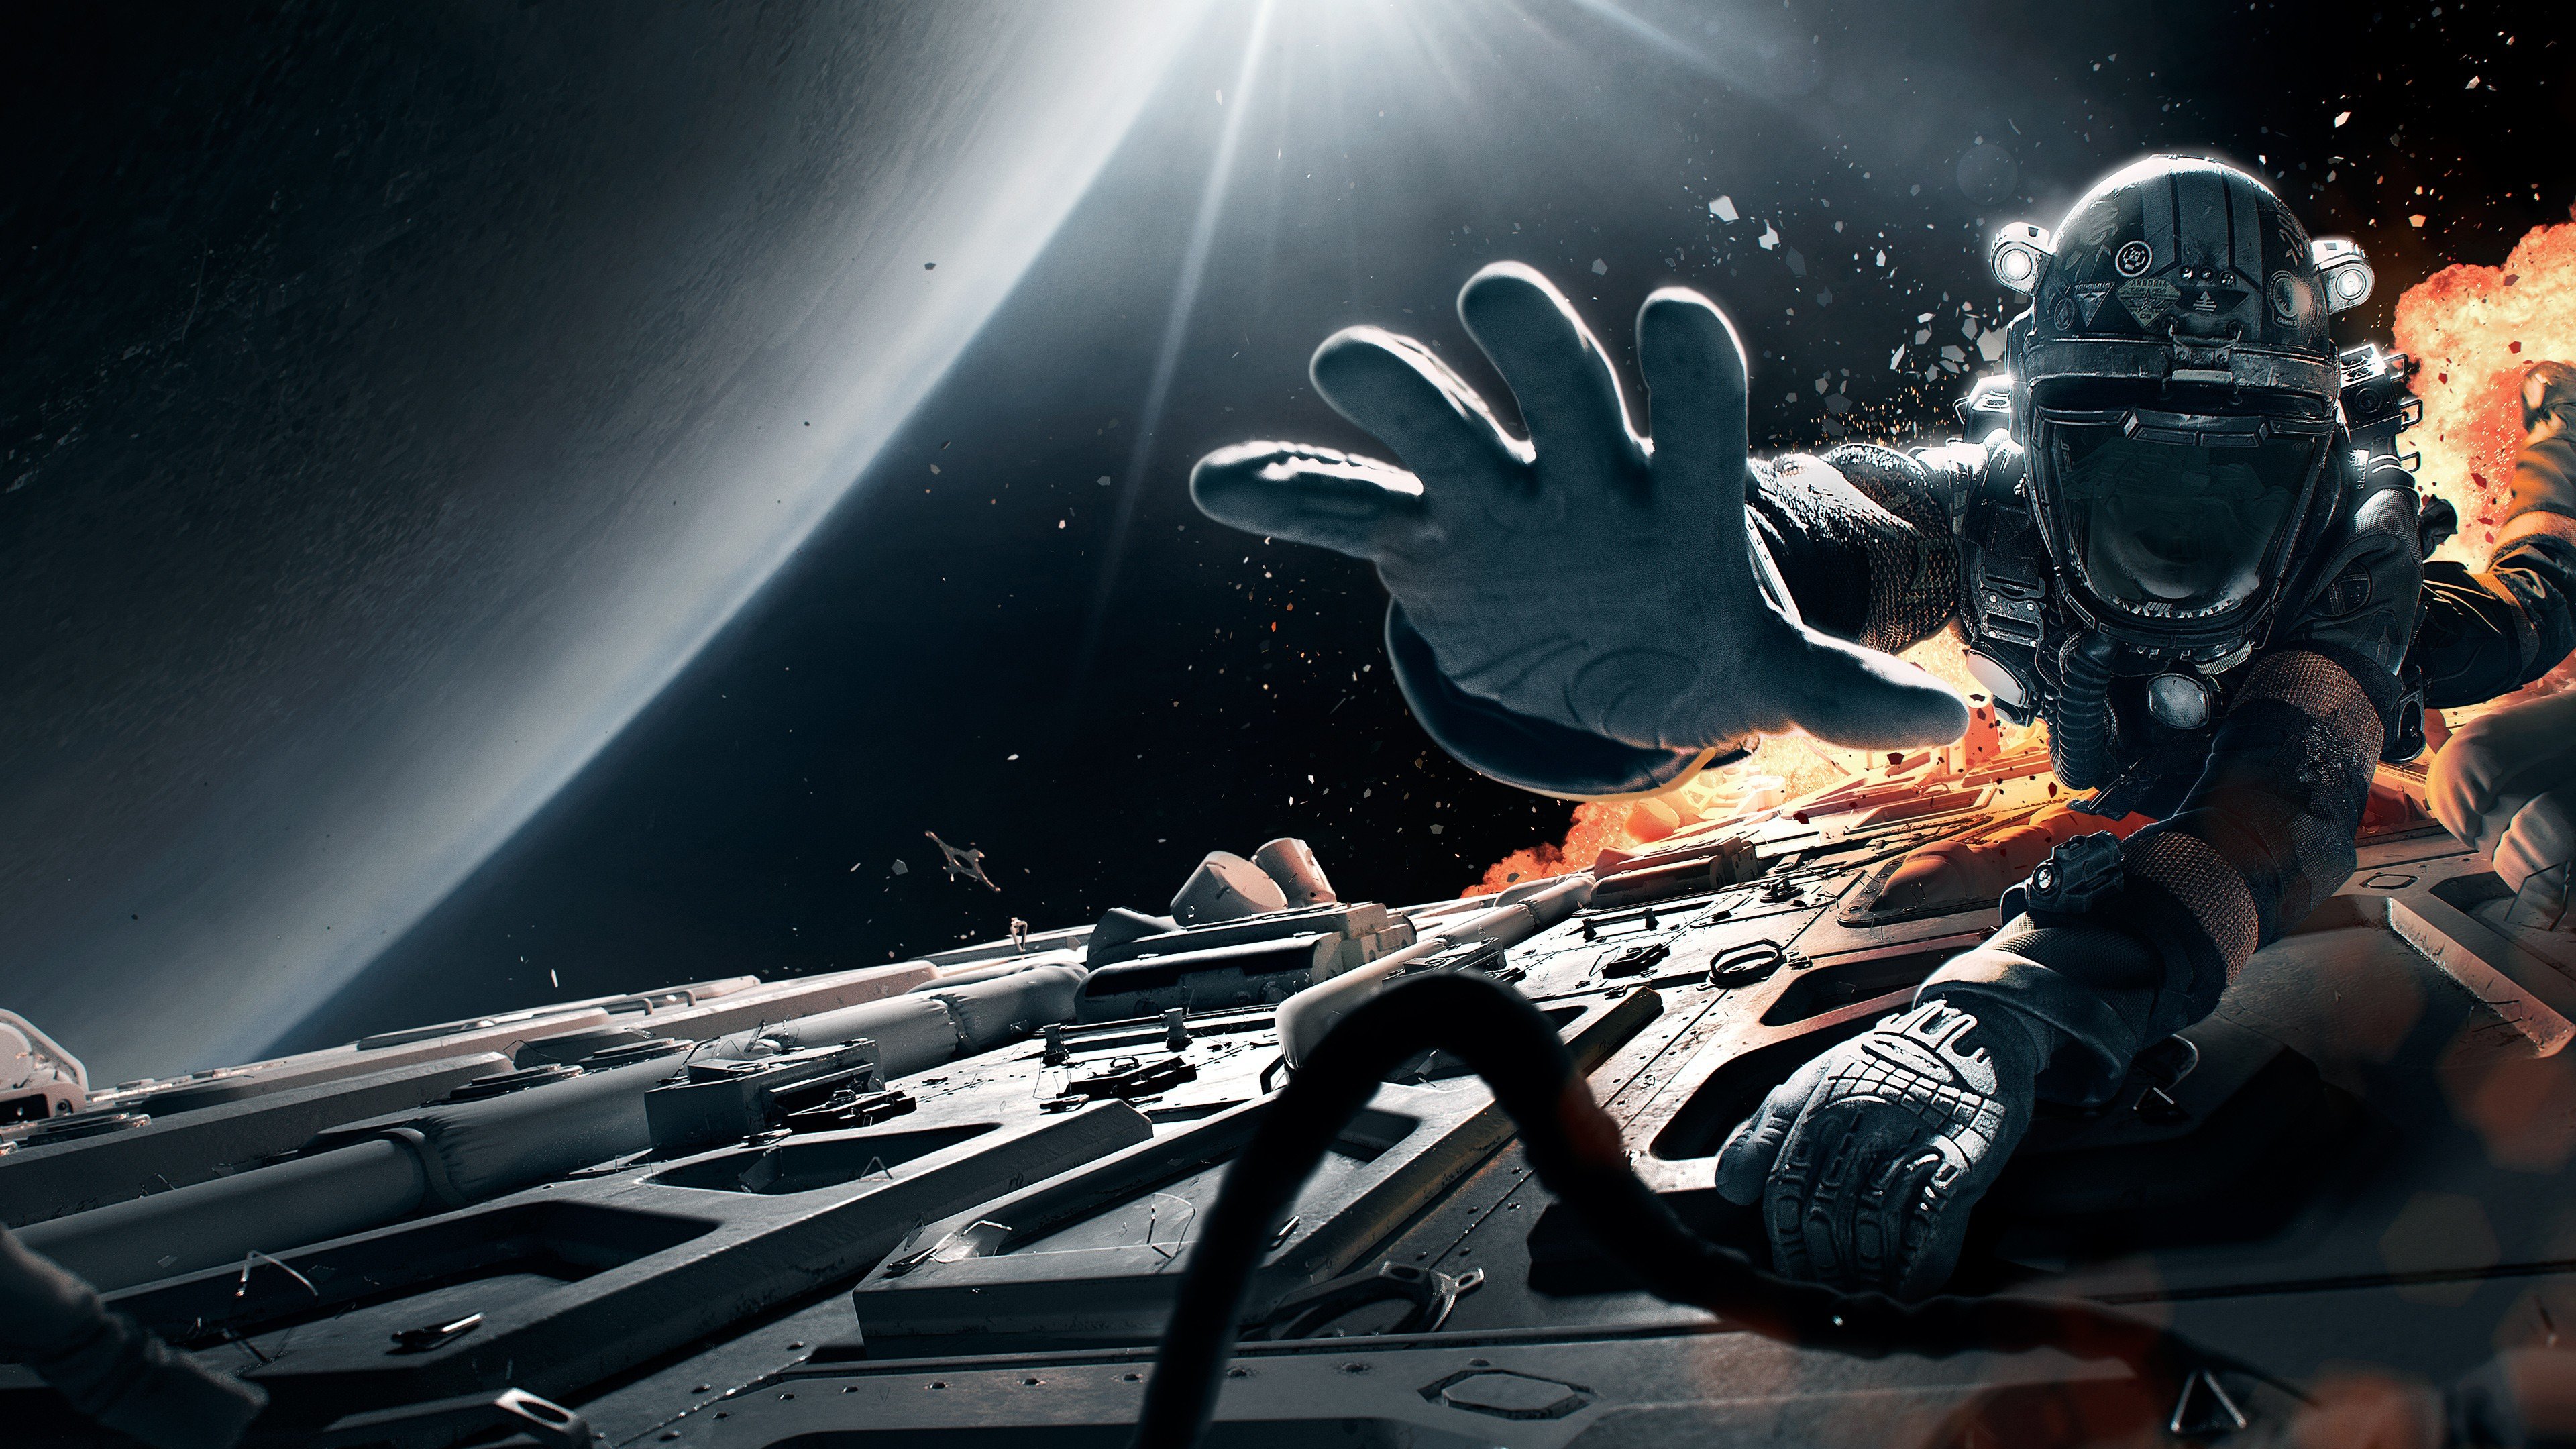 Wallpaper  the expanse space science fiction tv series TV spaceship  razorback 4480x1600  RaZzEr005  1730971  HD Wallpapers  WallHere